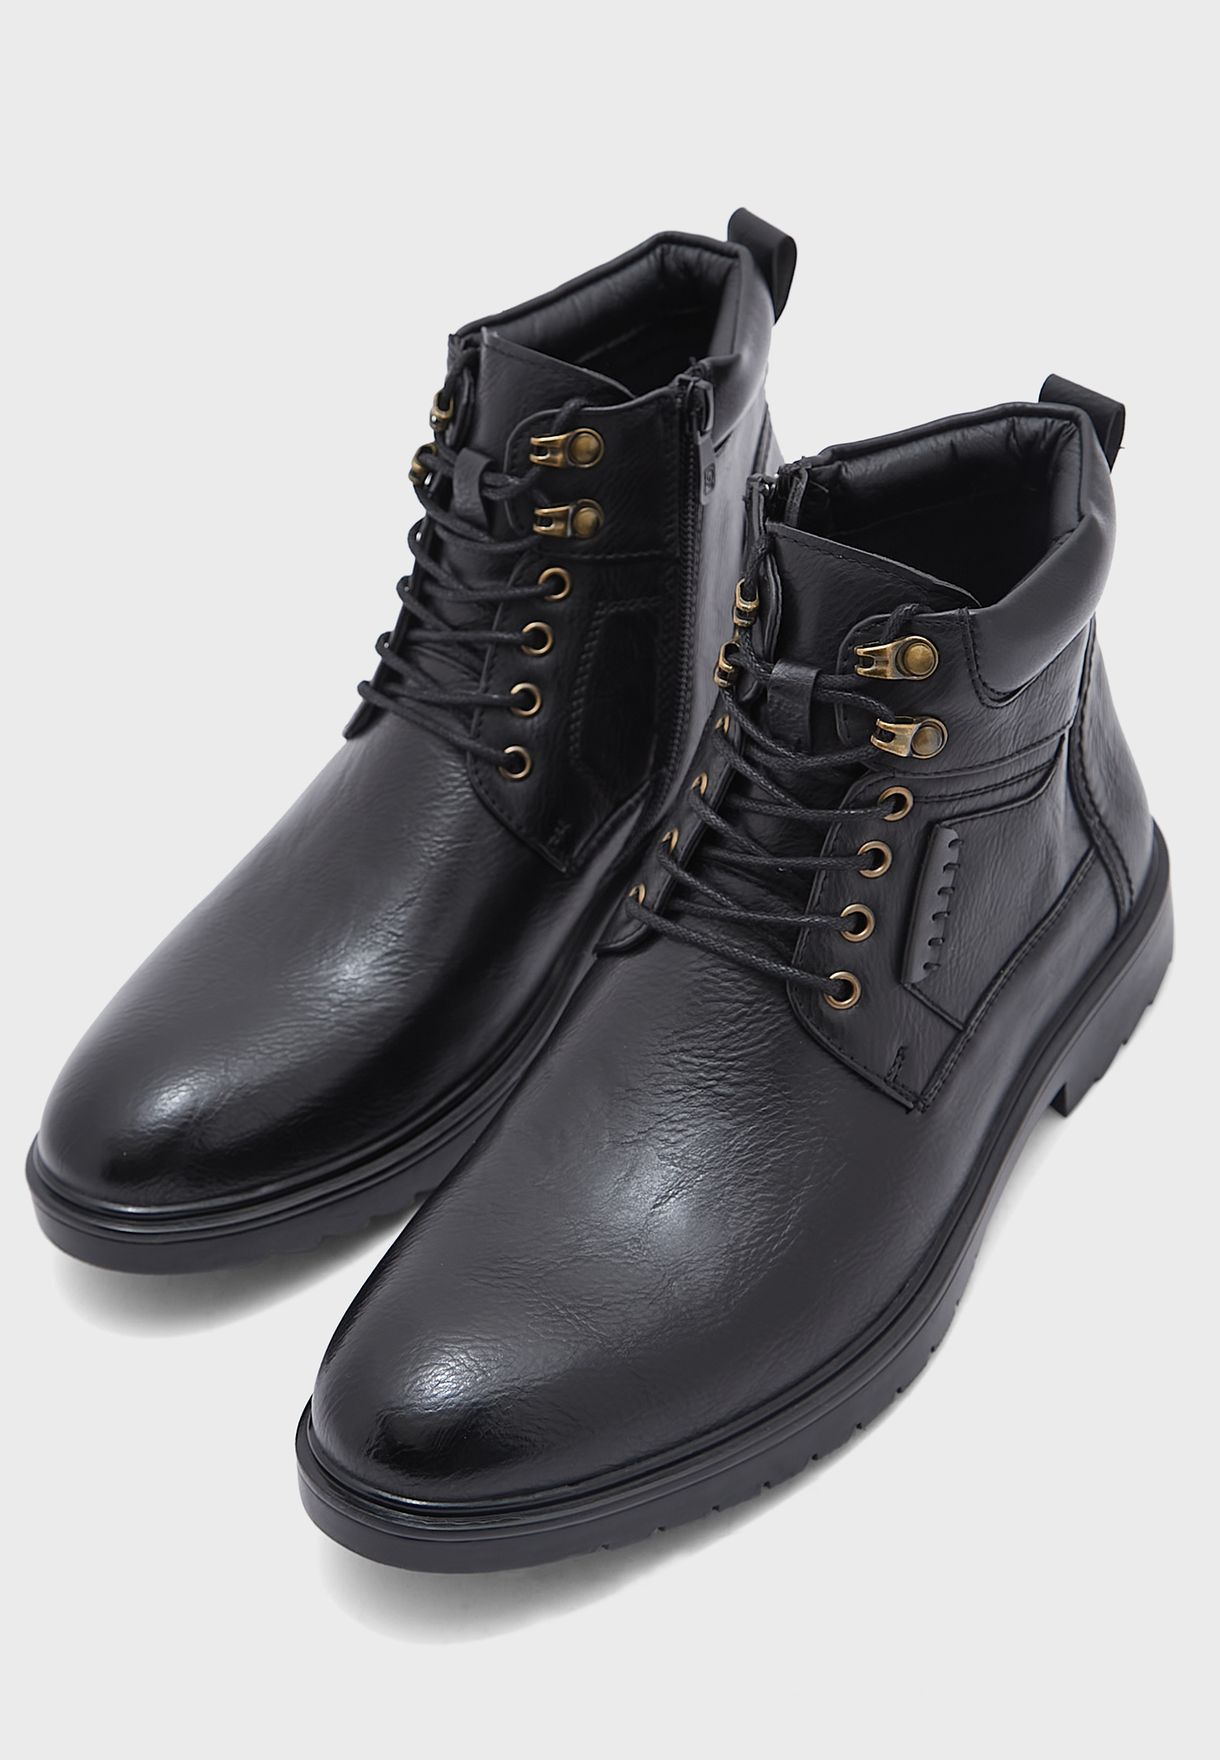 Simi Formal Laced Boots